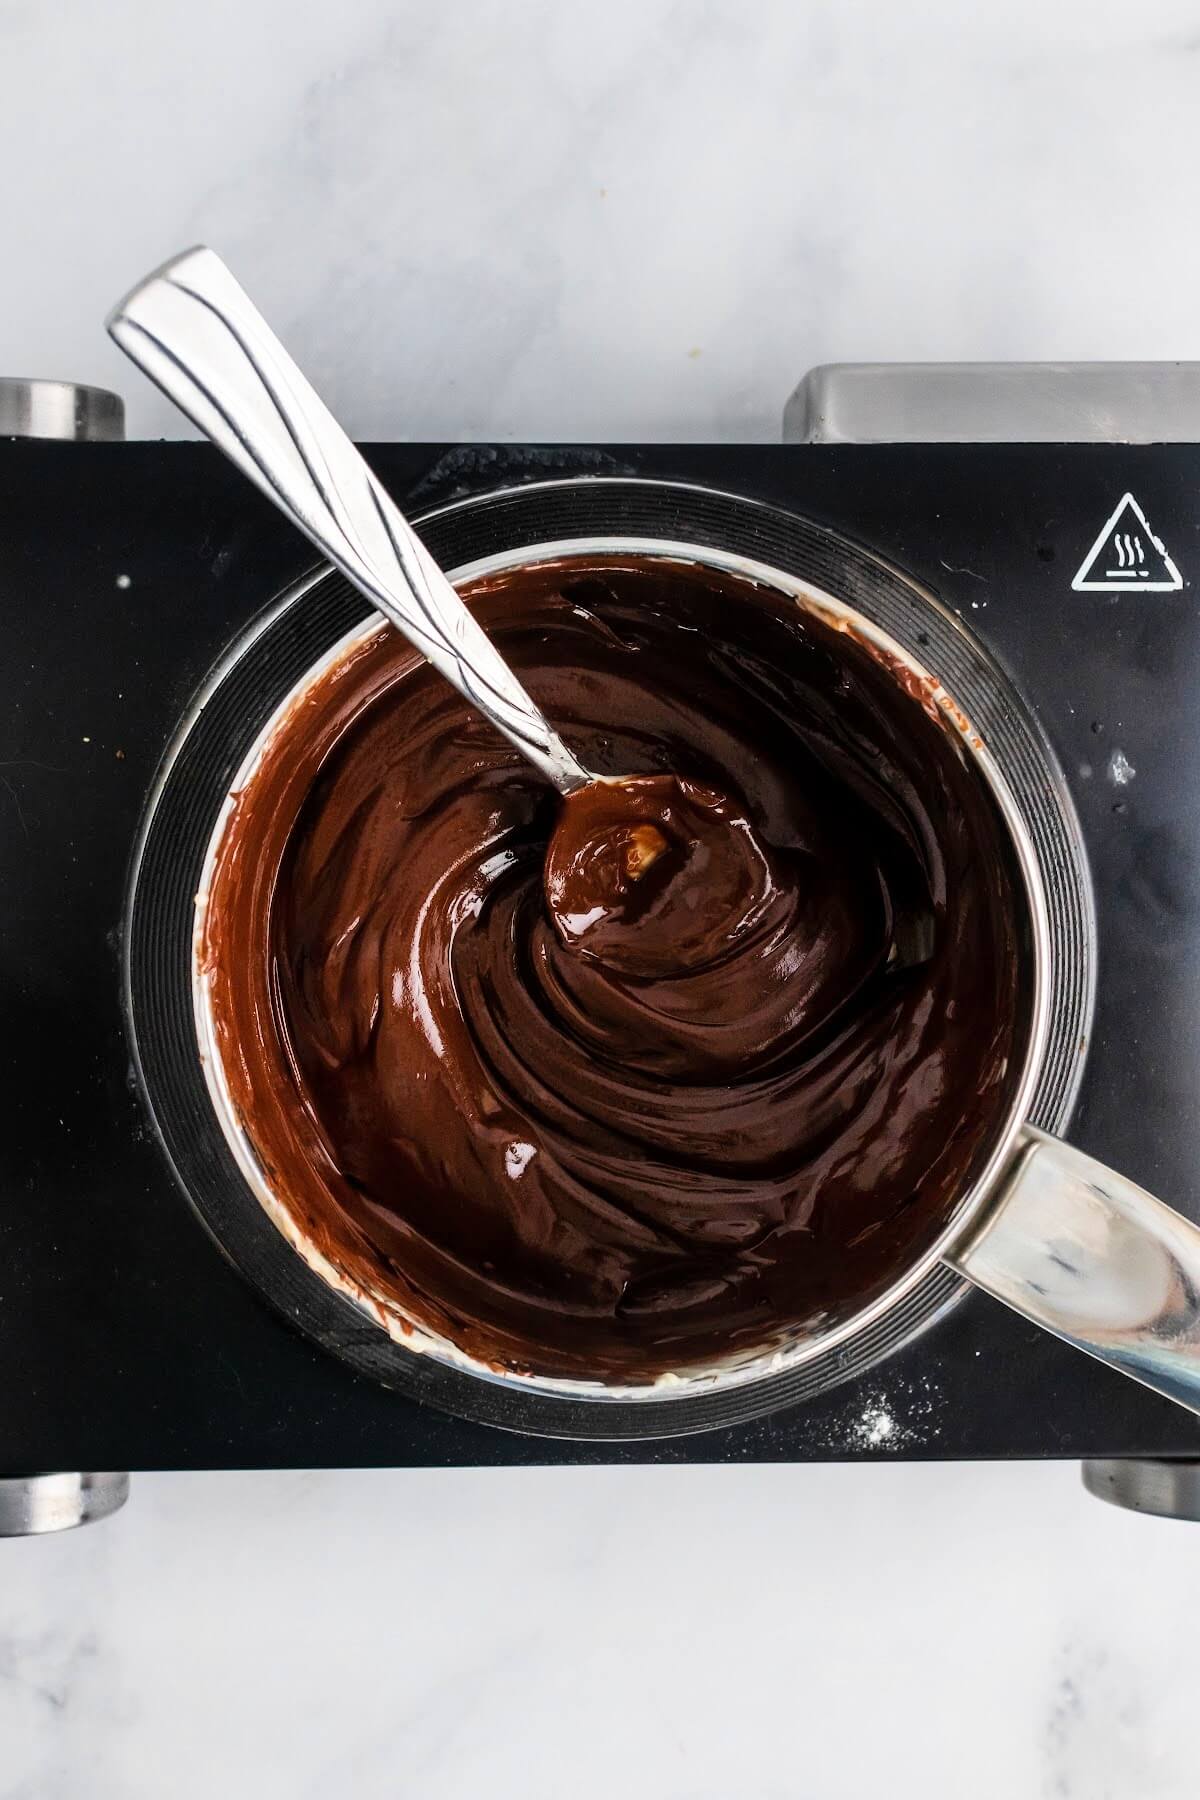 Saucepan with melted chocolate and a spoon stirring it sitting on top of an electric stovetop.